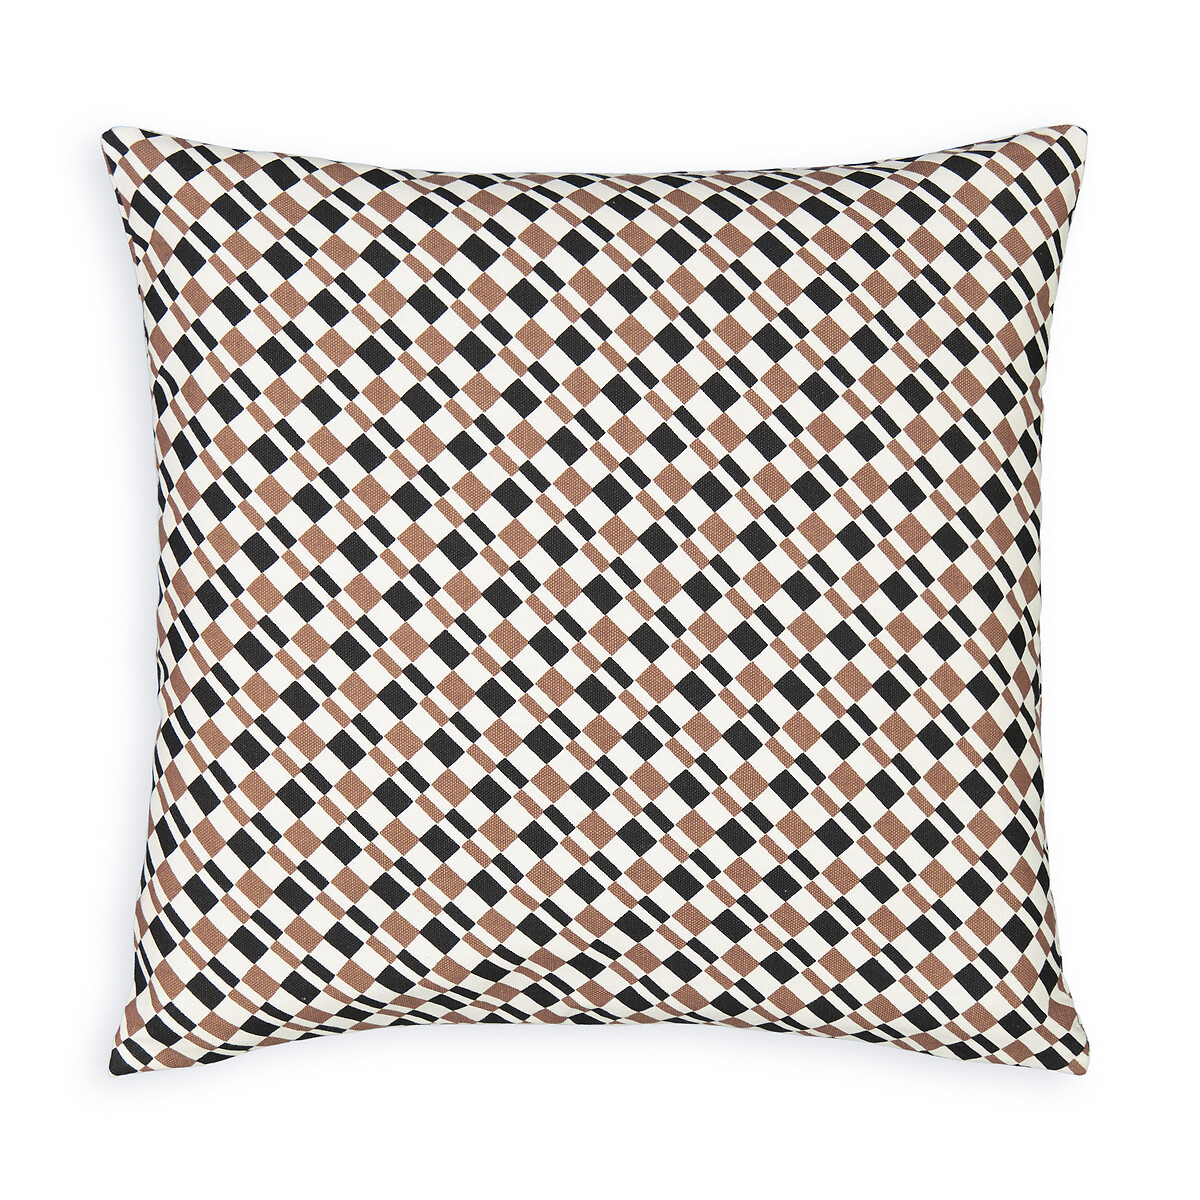 Set of 2 Faber Graphic 100% Recycled Cotton Cushion Covers